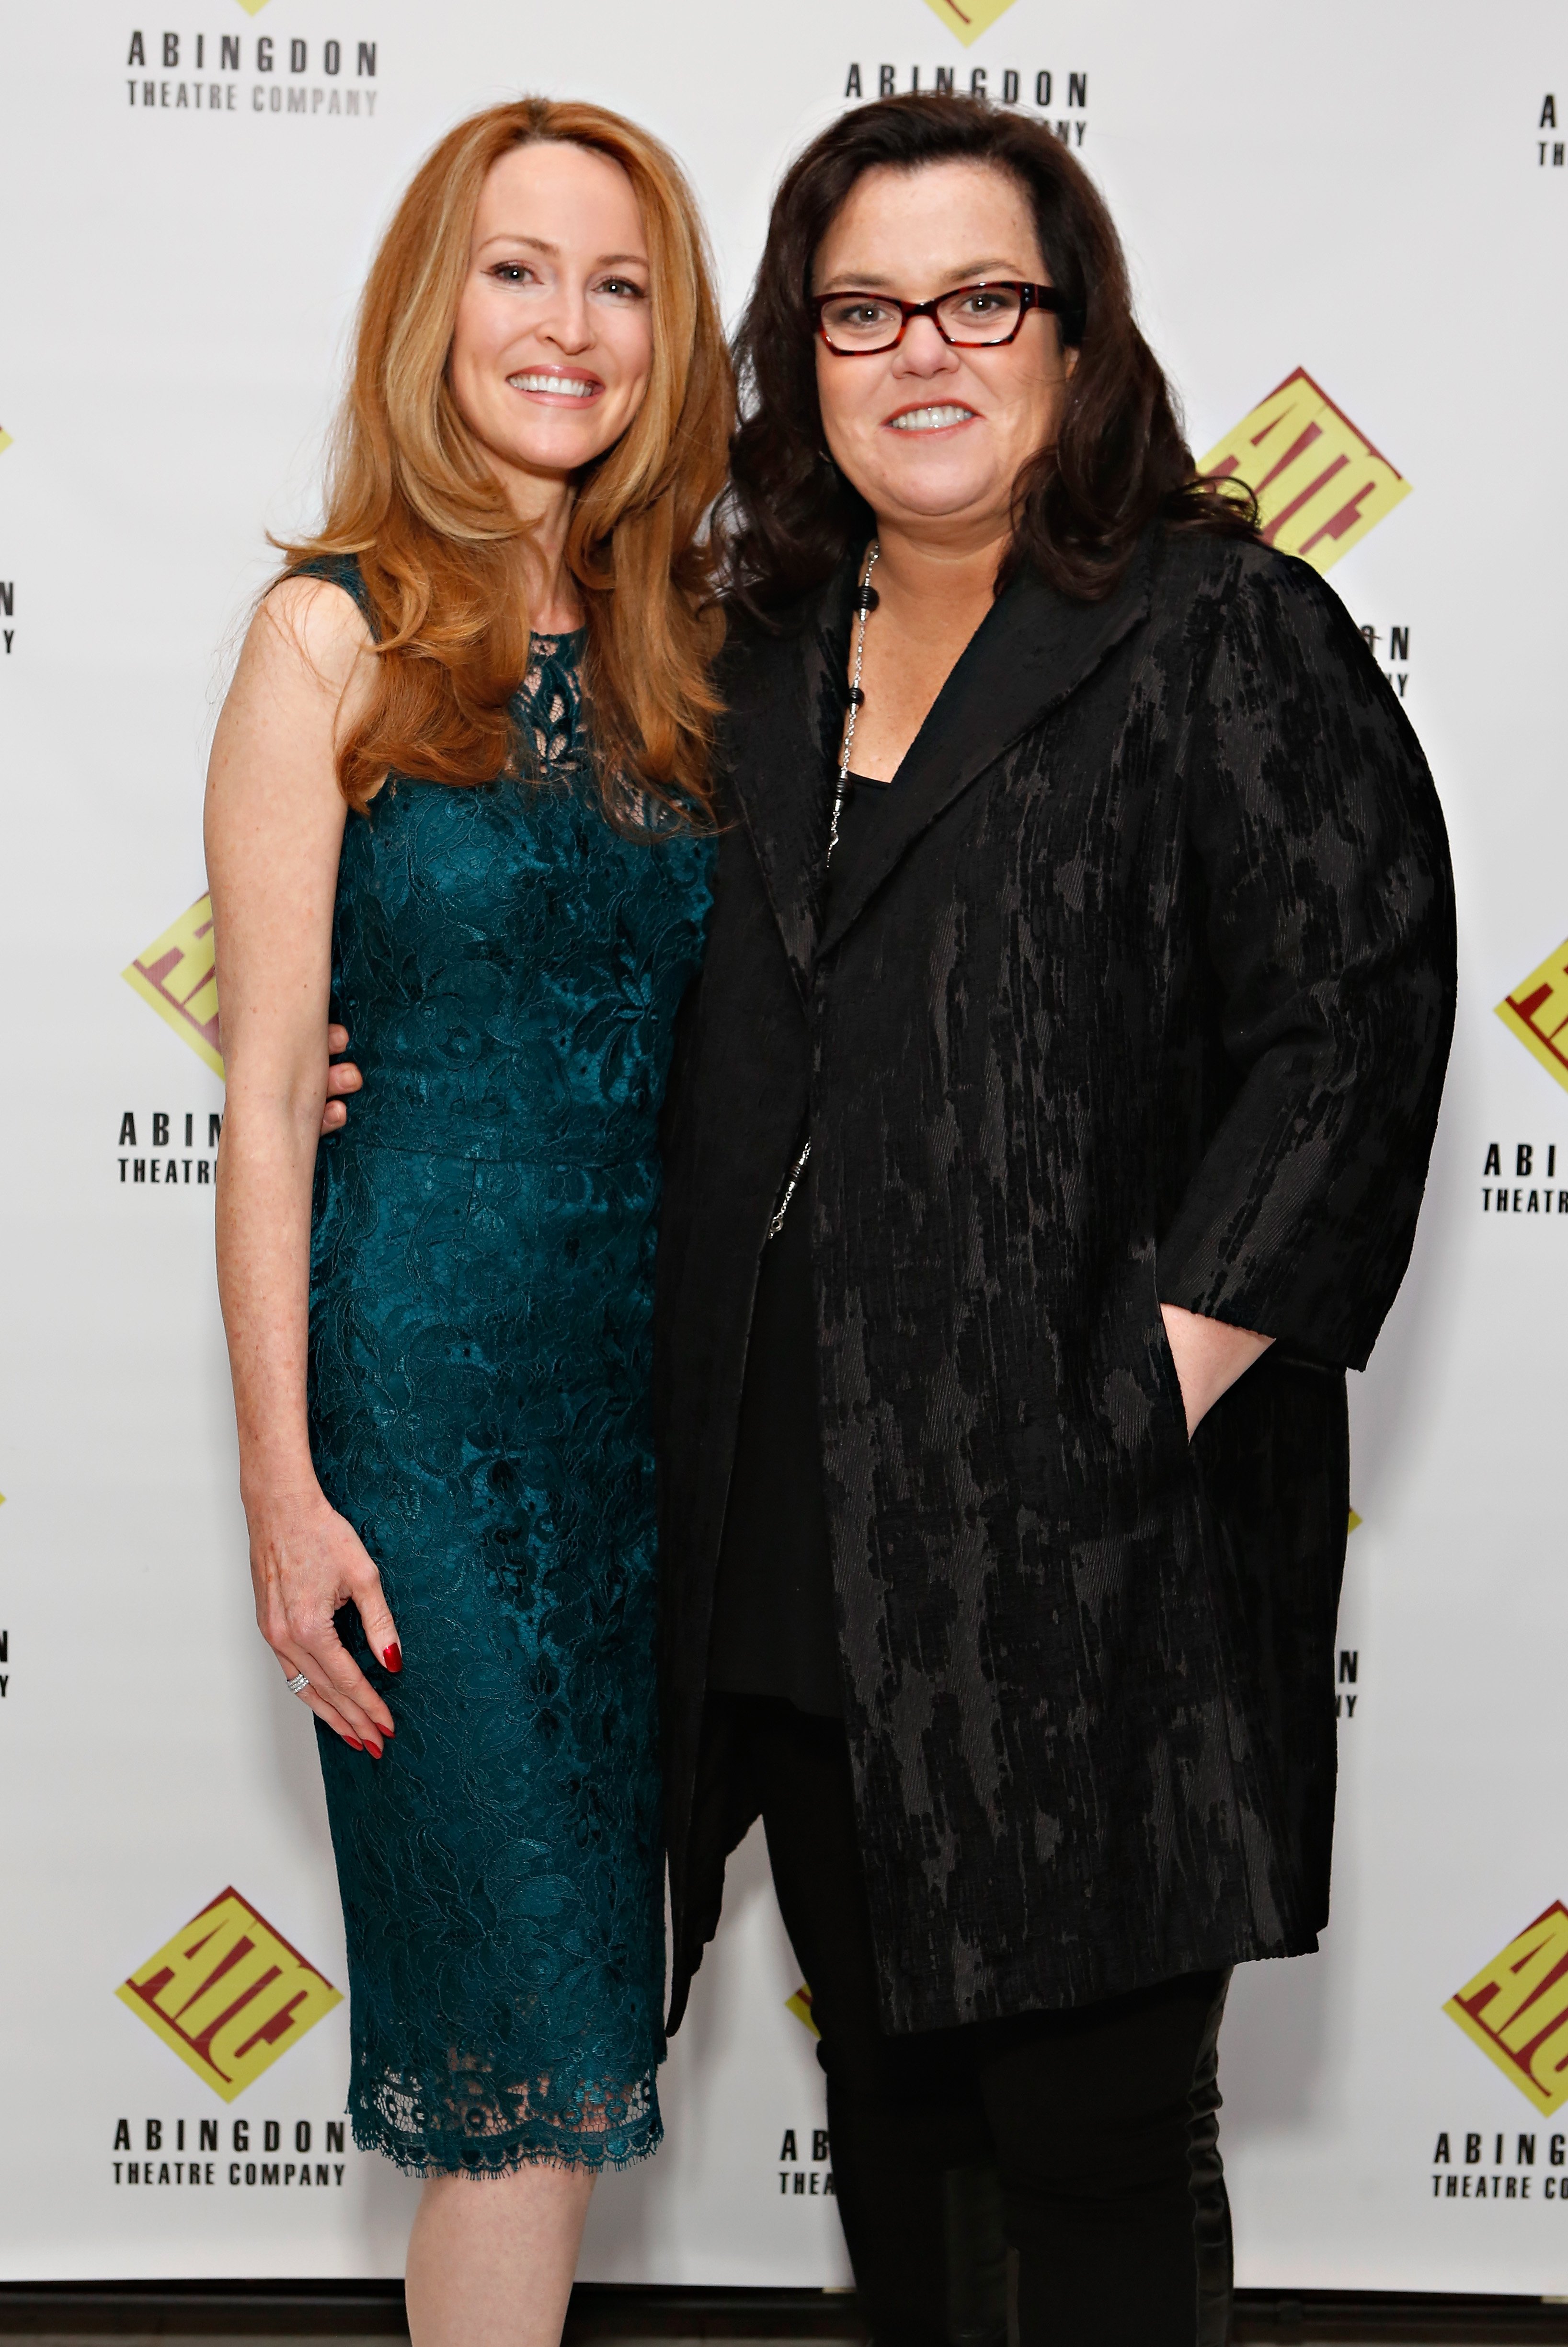 Michelle Rounds and Rosie O'Donnell attends an anniversary Gala at Espace in New York City on November 19, 2012 | Photo: Getty Images